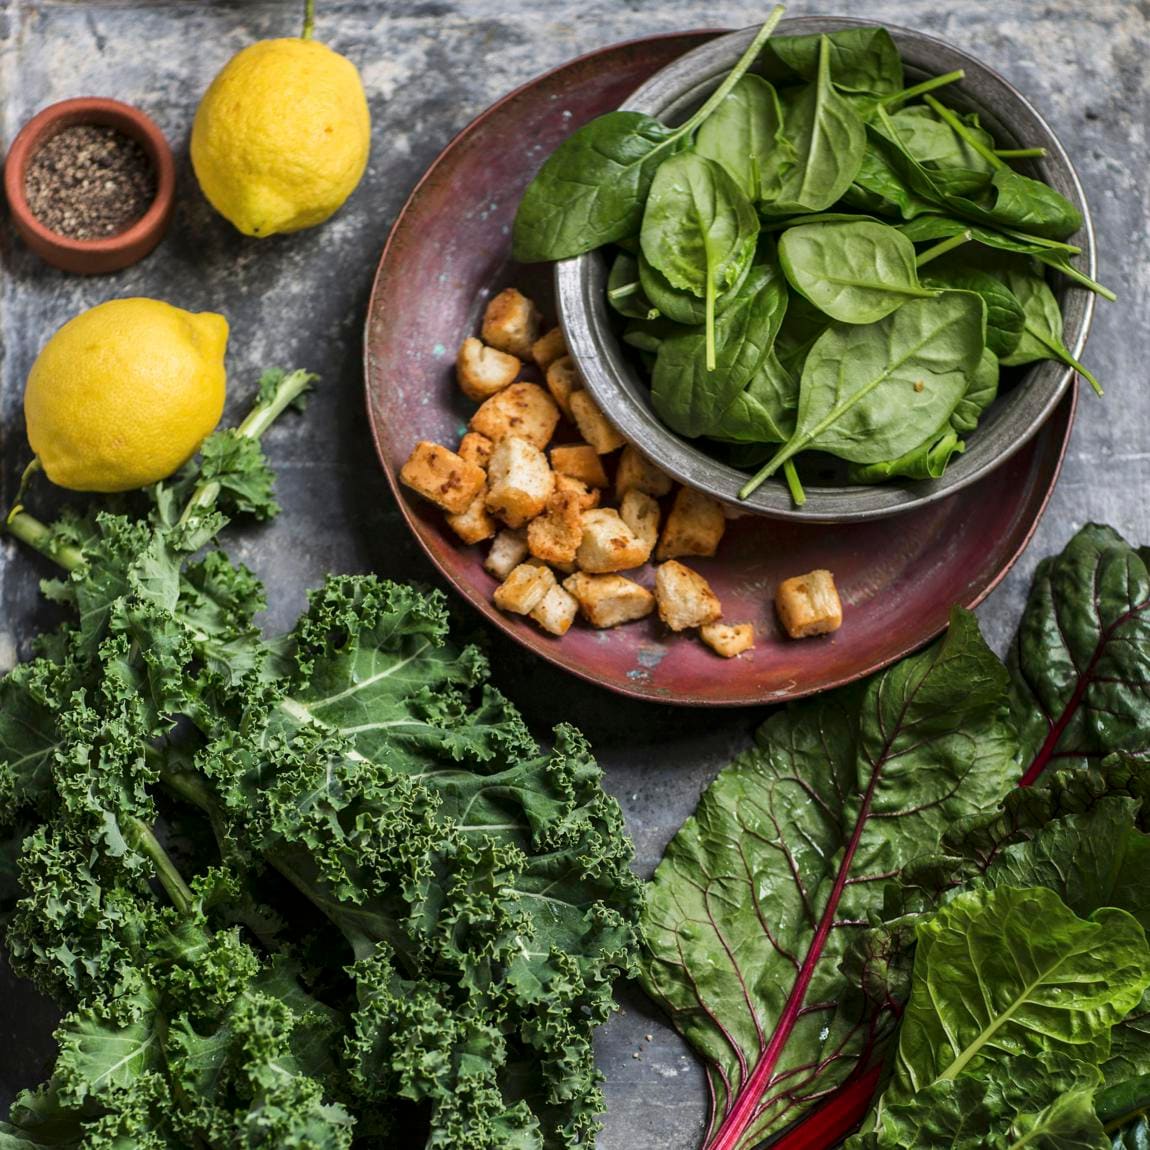 Ingredients for a salad with kale, spinach, chard and croutons